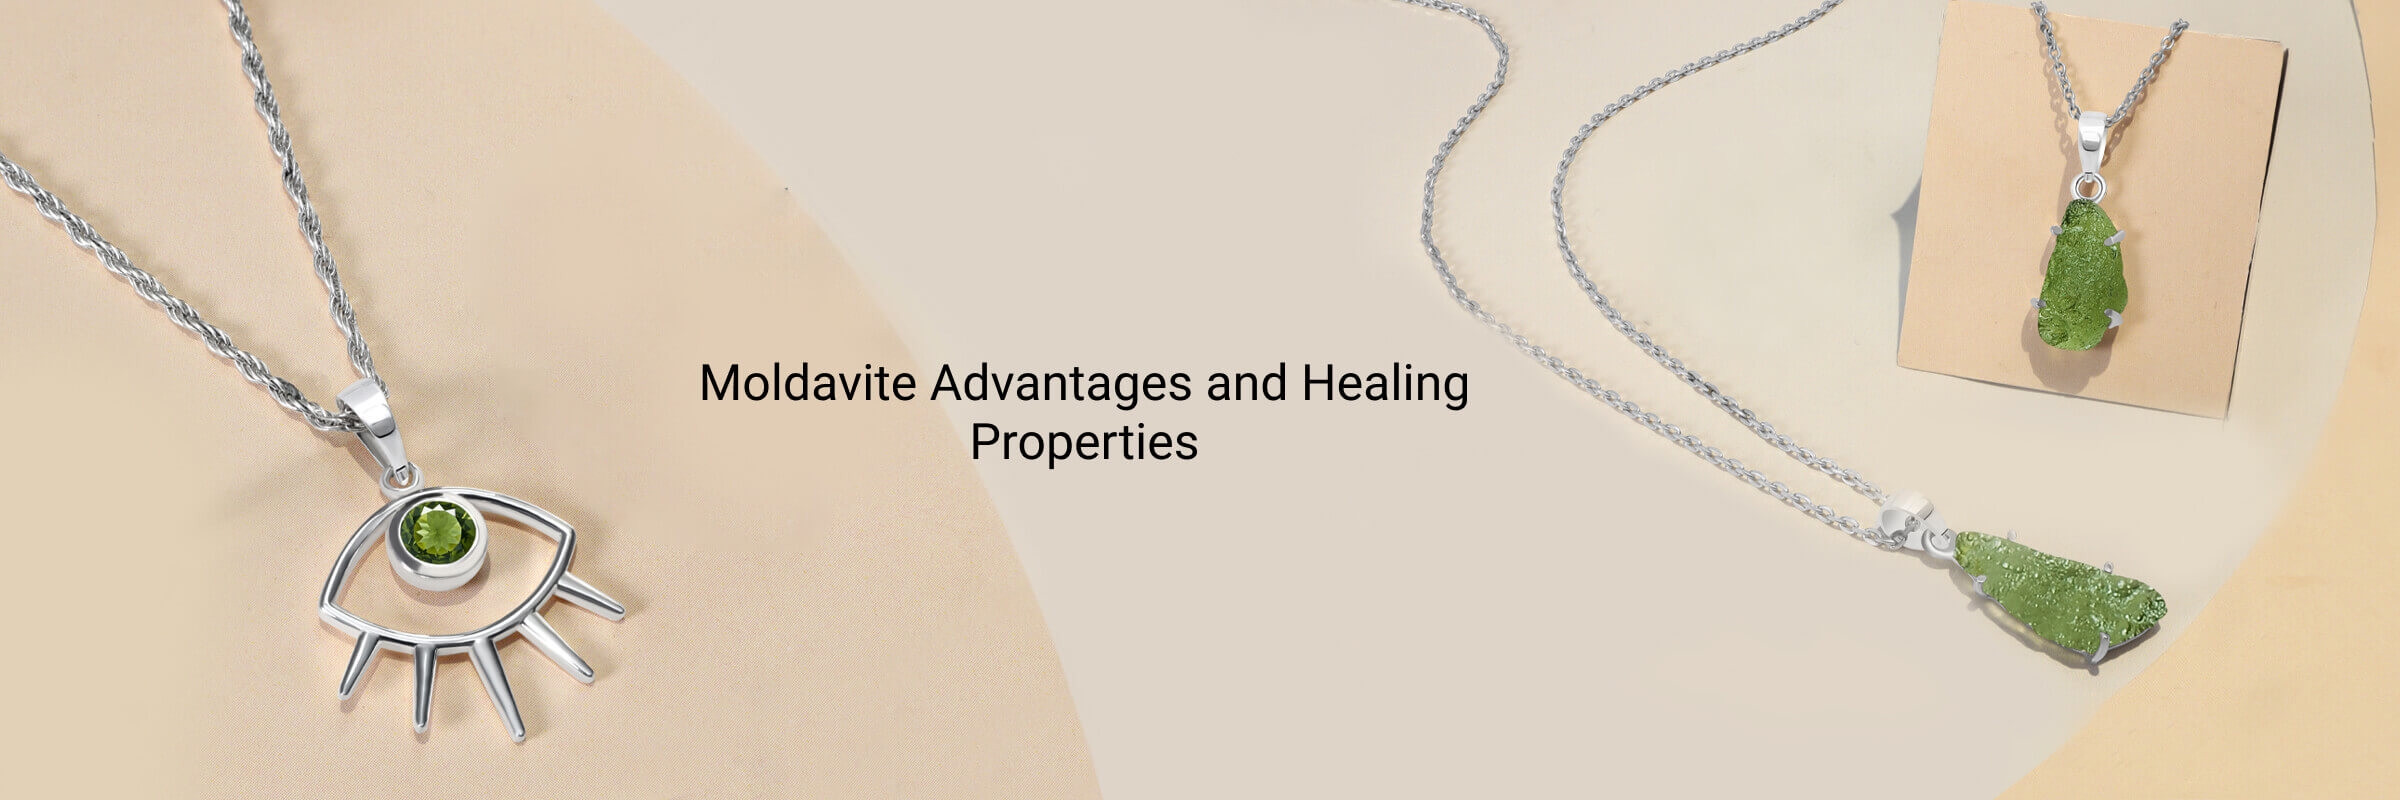 What are the Advantages of wearing moldavite